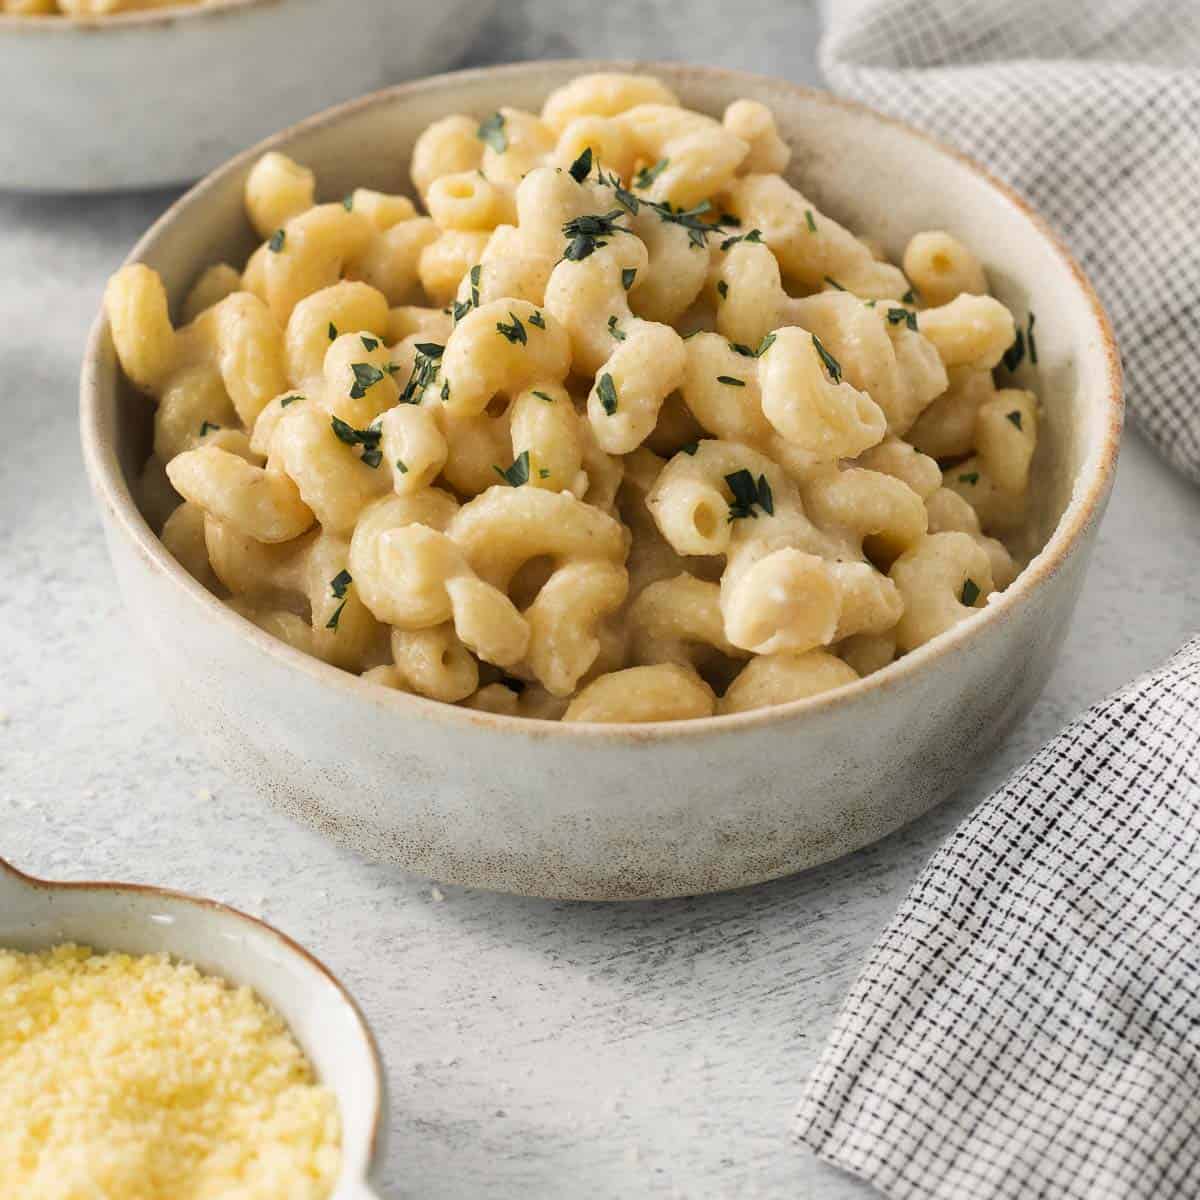 Cauliflower alfredo sauce and pasta in a bowl